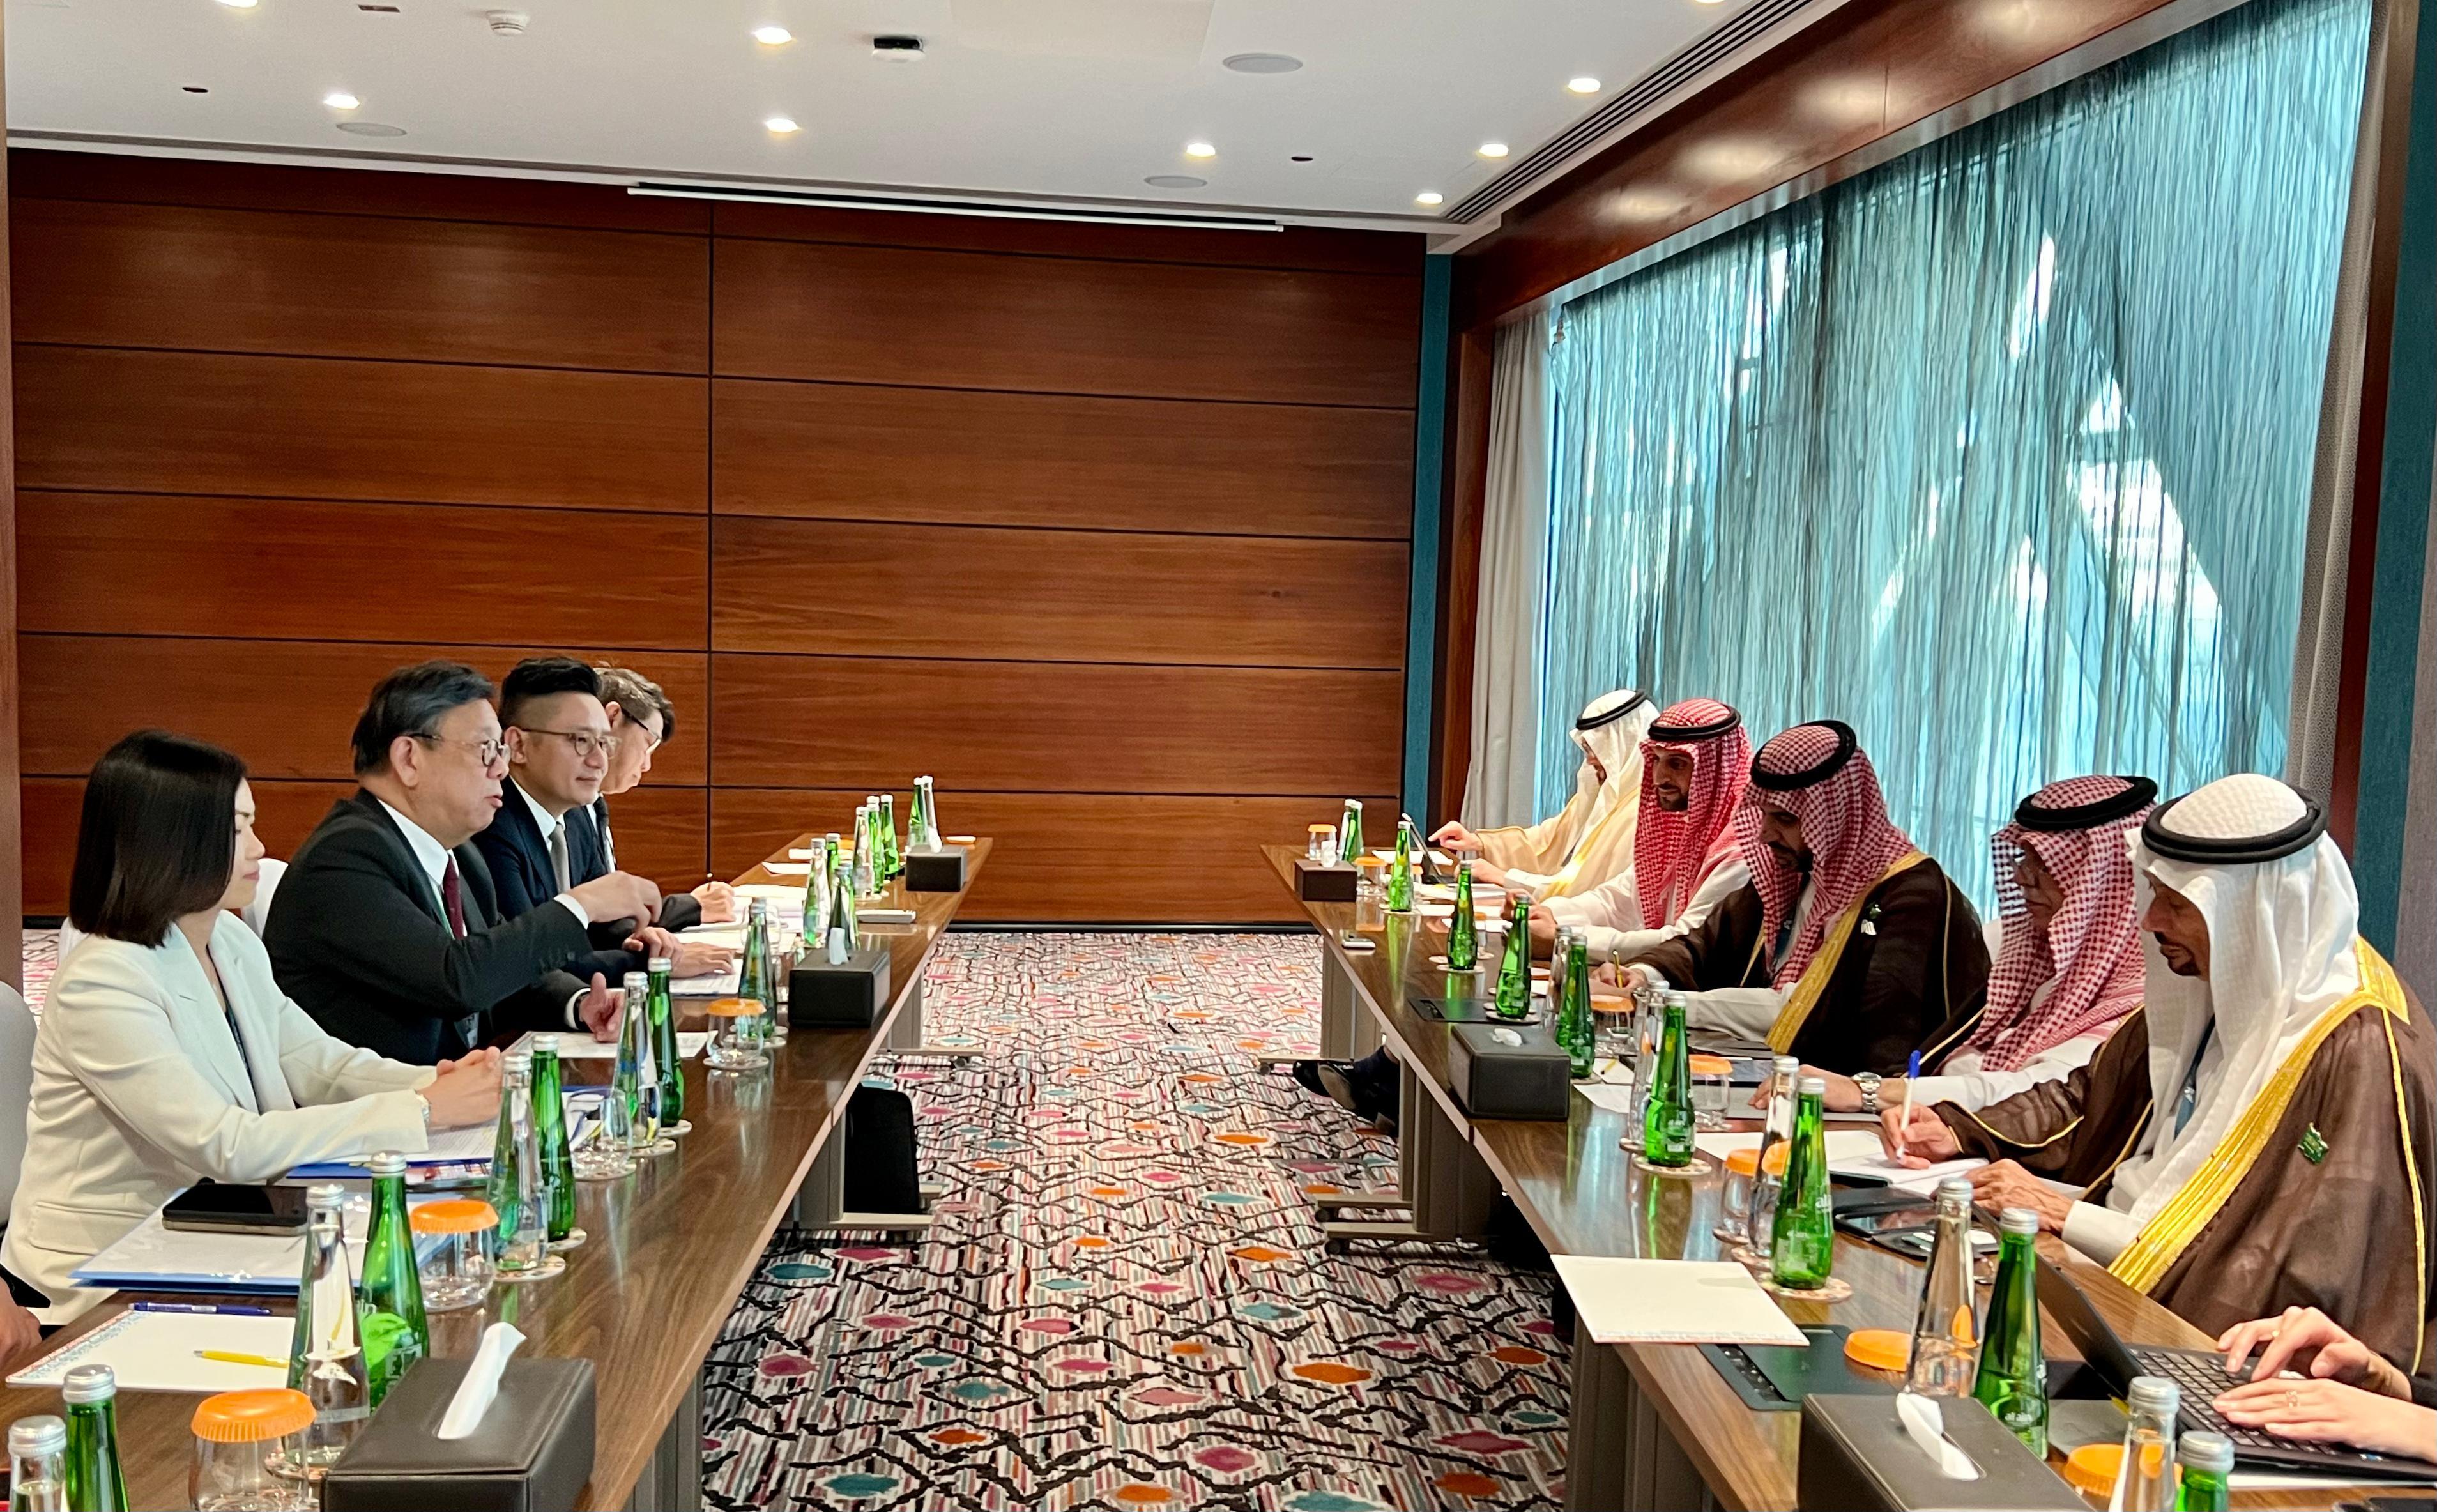 The Secretary for Commerce and Economic Development, Mr Algernon Yau (second left), held a bilateral meeting with the Minister of Commerce of Saudi Arabia, Dr Majid bin Abdullah Al Kassabi (second right), on the sidelines of the 13th World Trade Organization Ministerial Conference in Abu Dhabi, the United Arab Emirates, on February 26 (Abu Dhabi time) to exchange views on issues of mutual interest.